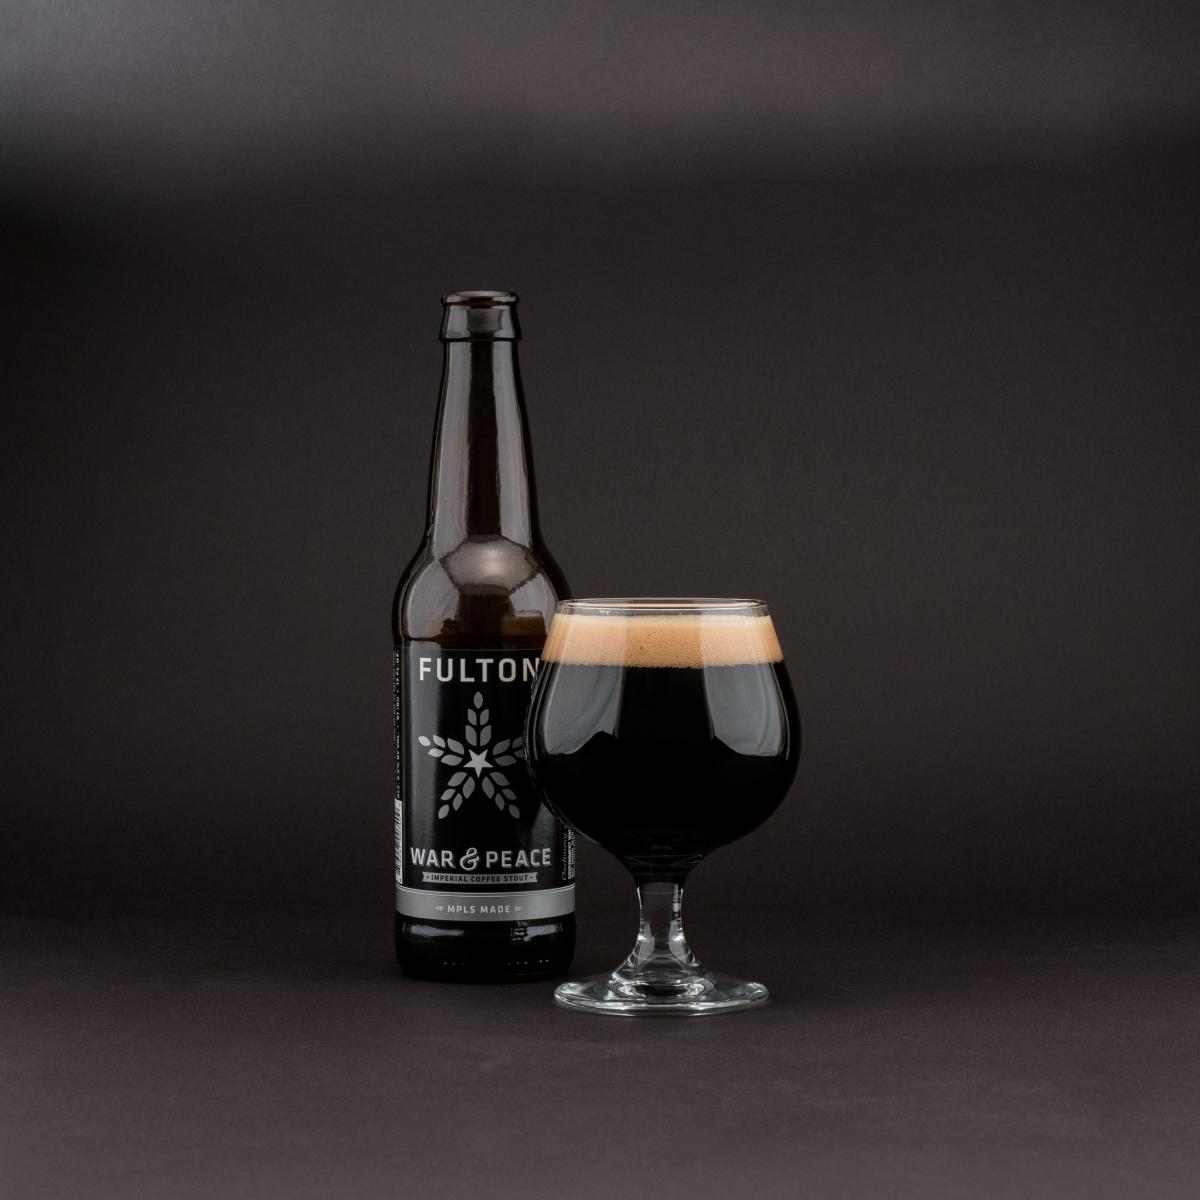 Fulton's War & Peace Imperial Coffee Stout